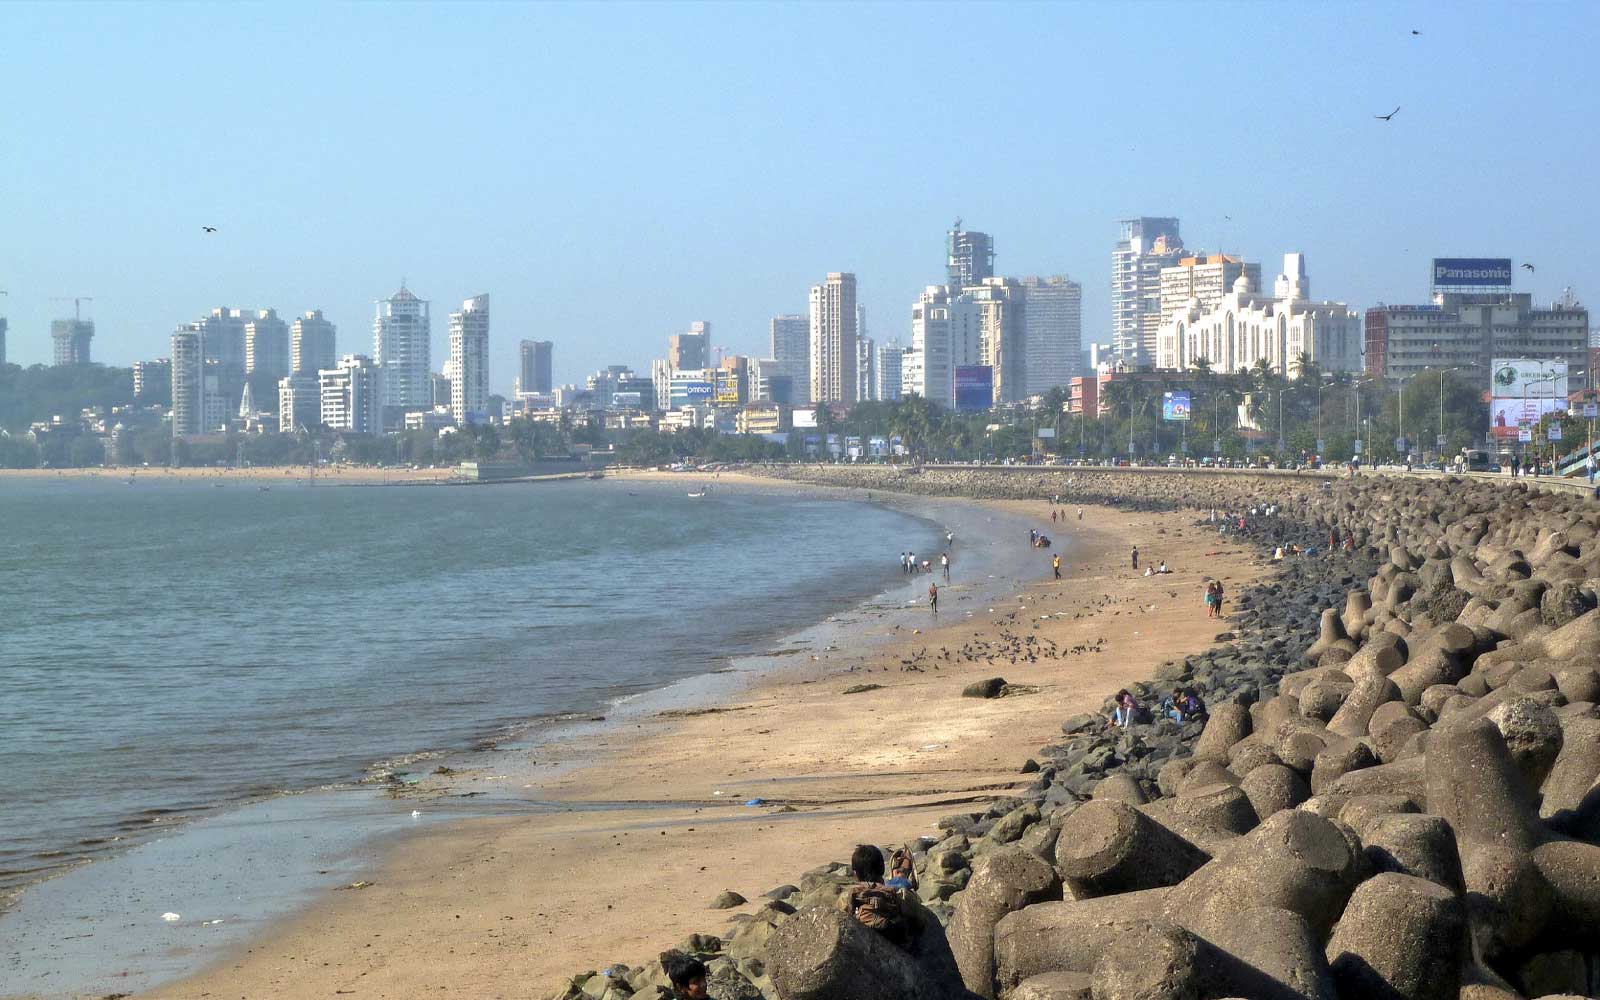 Mumbai's Must Visit Guide to Attractions